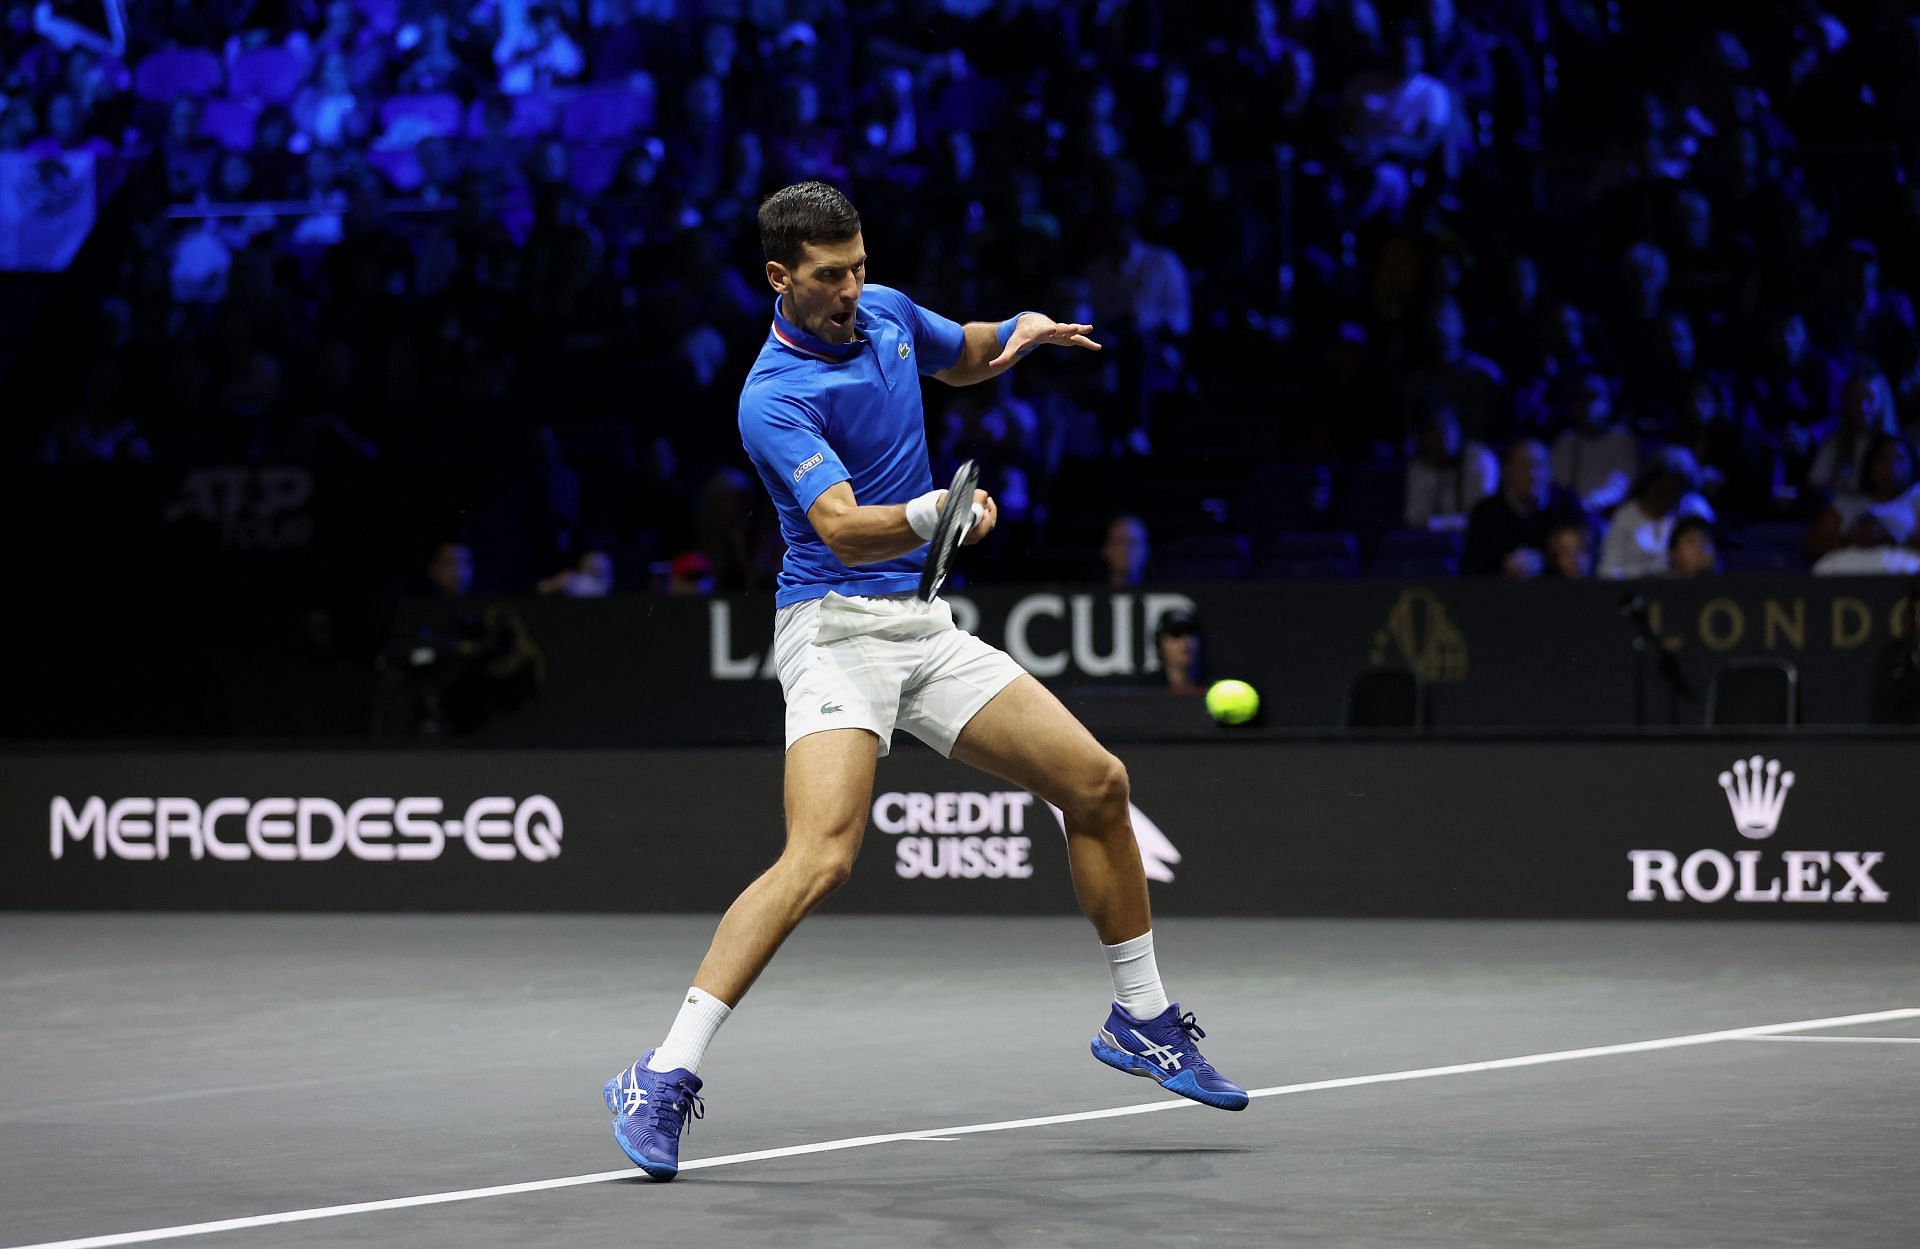 Novak Djokovic in action at the 2022 Laver Cup